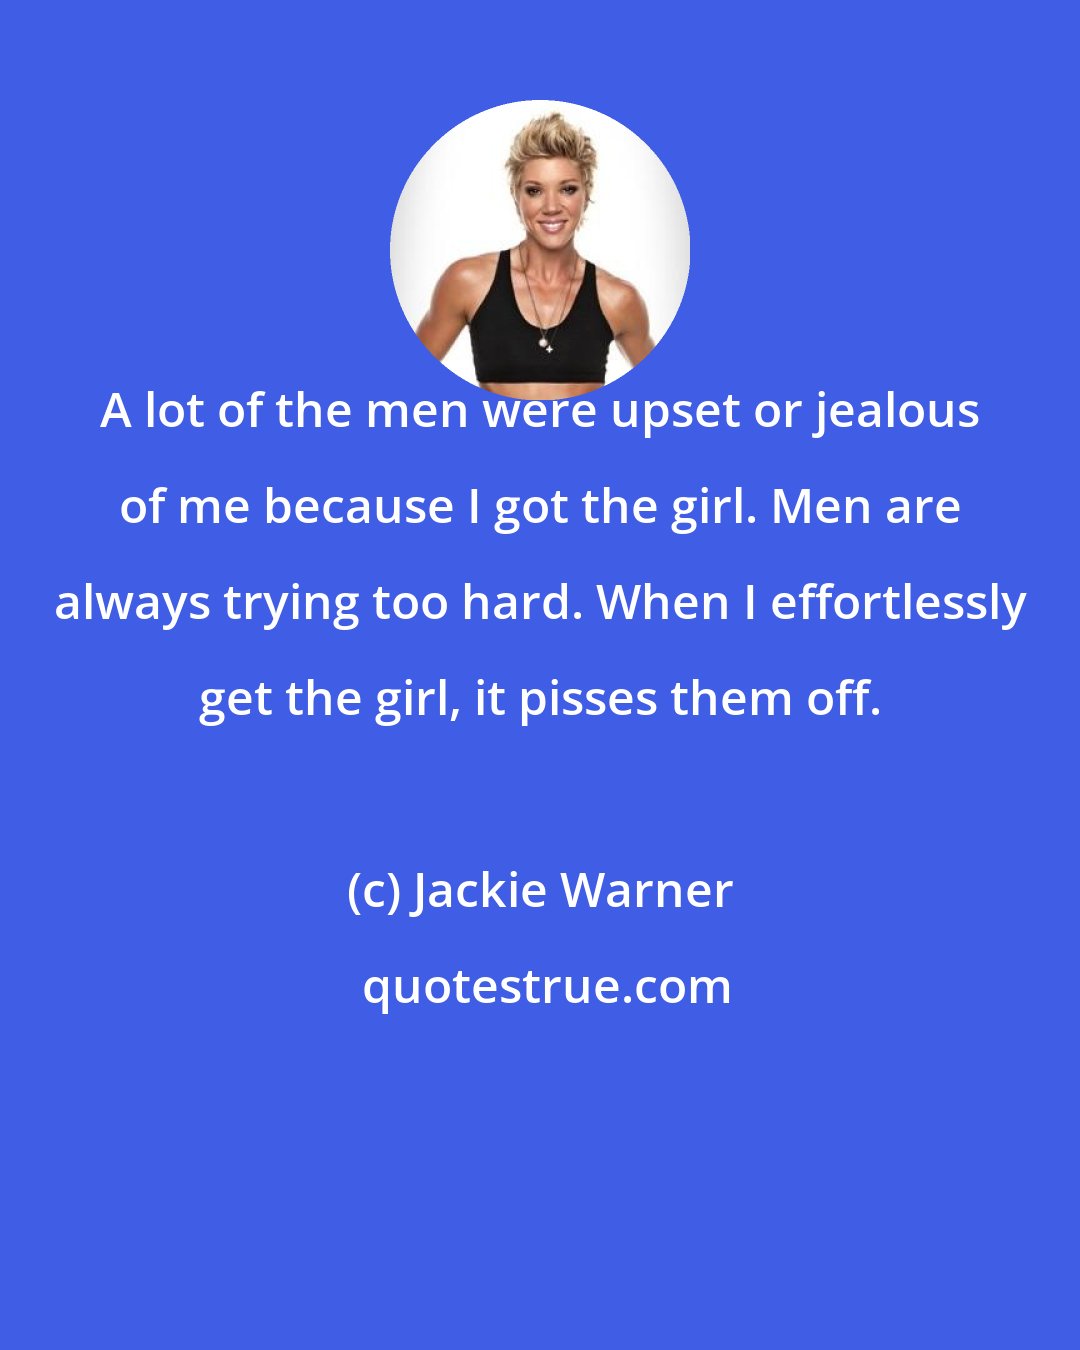 Jackie Warner: A lot of the men were upset or jealous of me because I got the girl. Men are always trying too hard. When I effortlessly get the girl, it pisses them off.